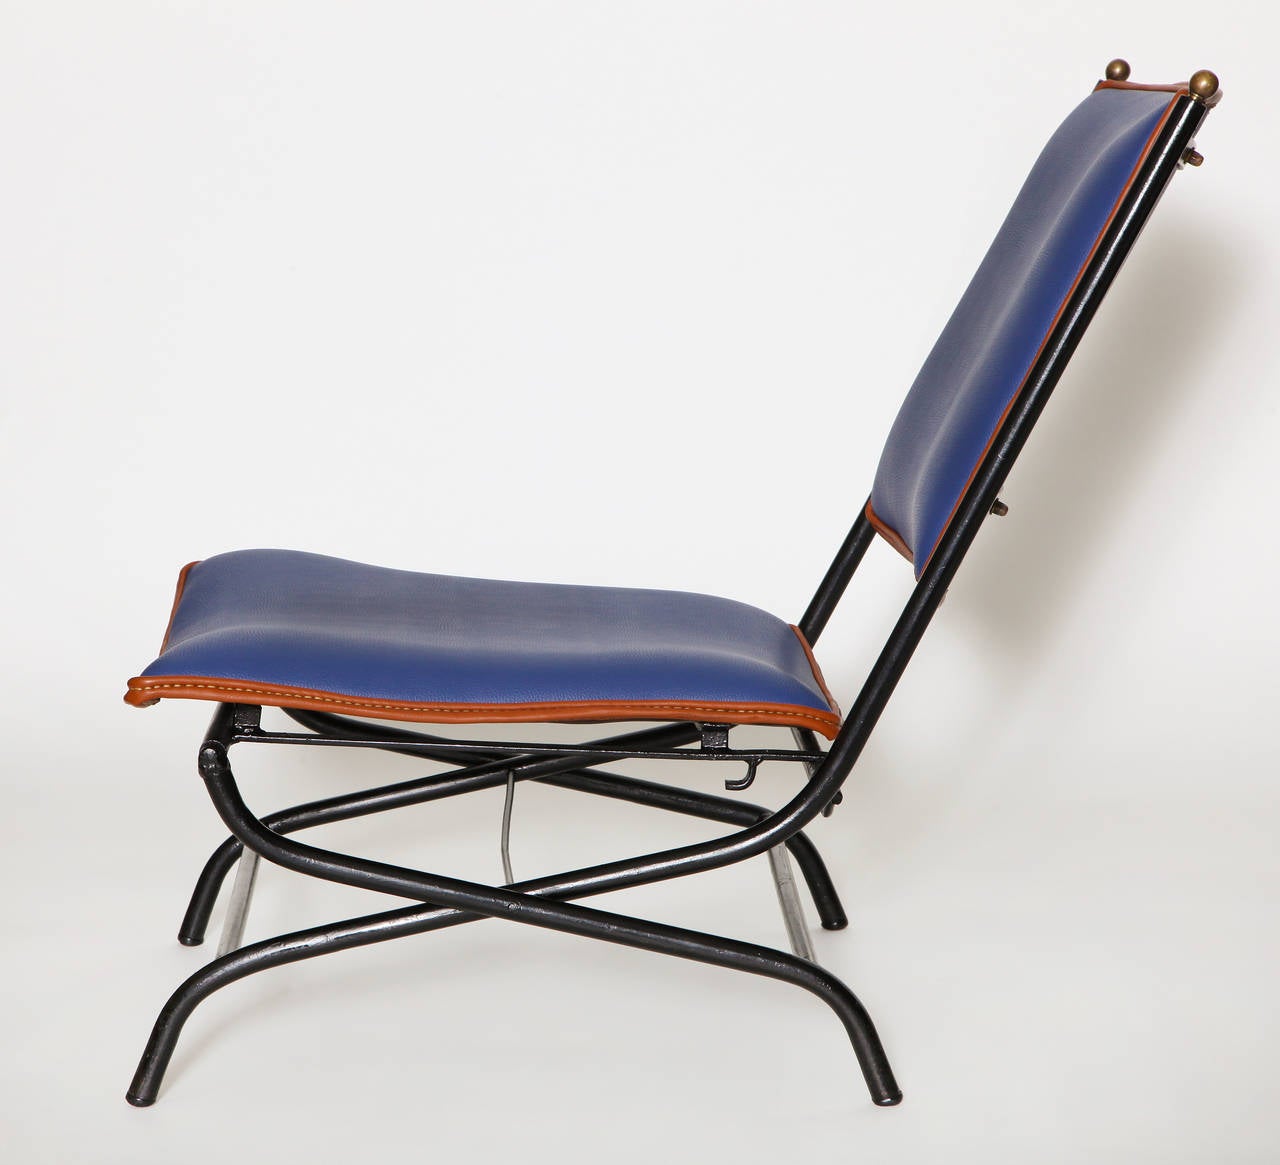 Mid-20th Century Jacques Adnet, Pair of leather and iron adjustable chairs, France, c. 1950